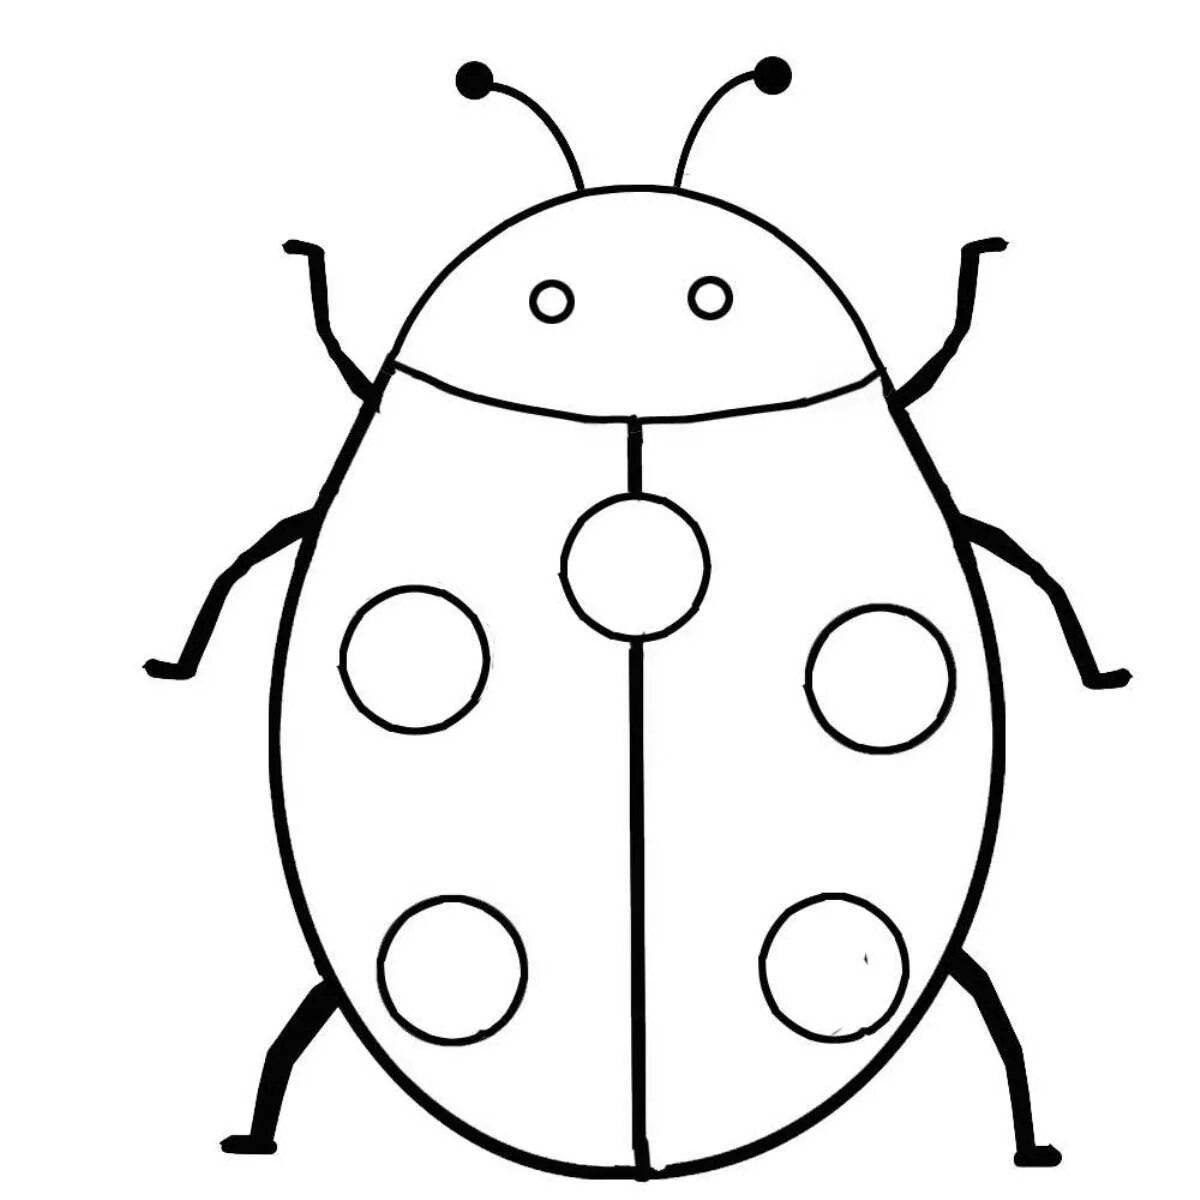 Insect coloring page for 6-7 year olds